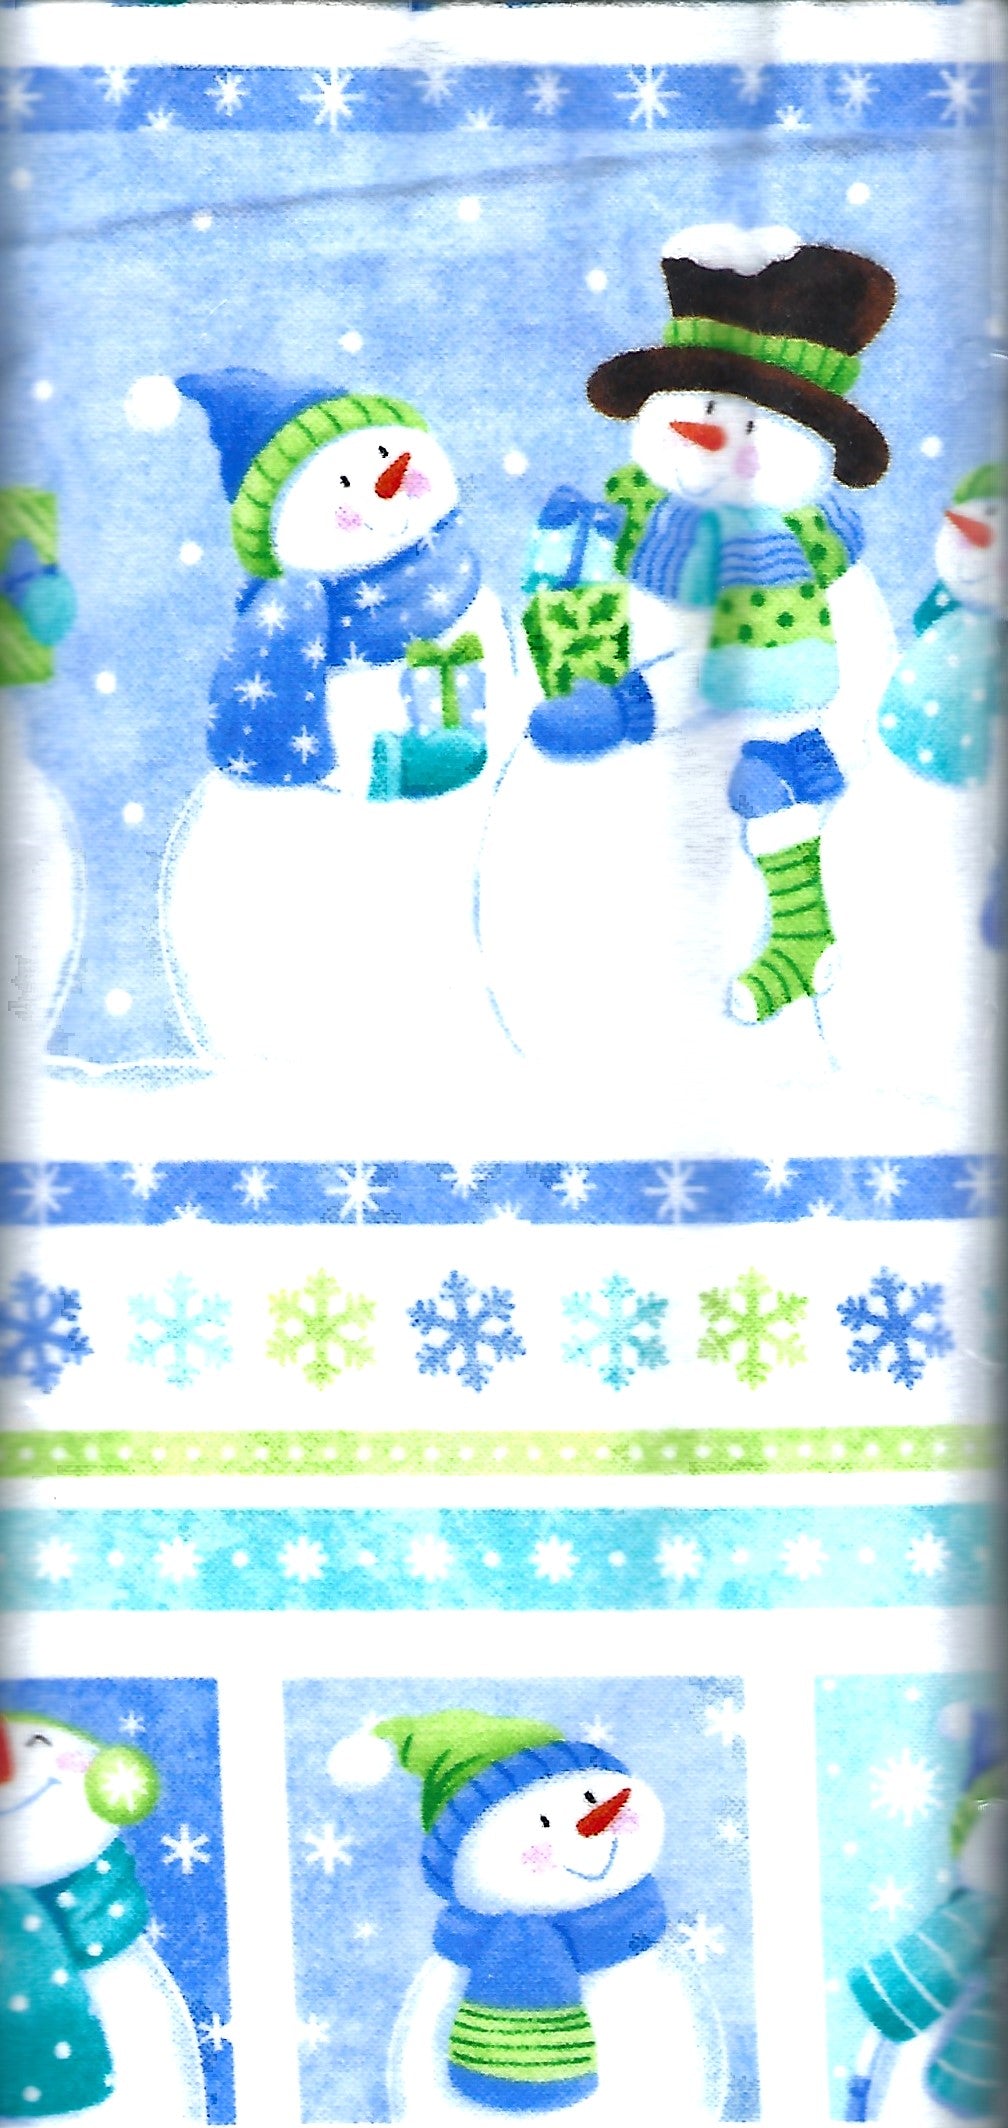 Cheerful white snowmen on snowy blue background with green and blue stripes below.